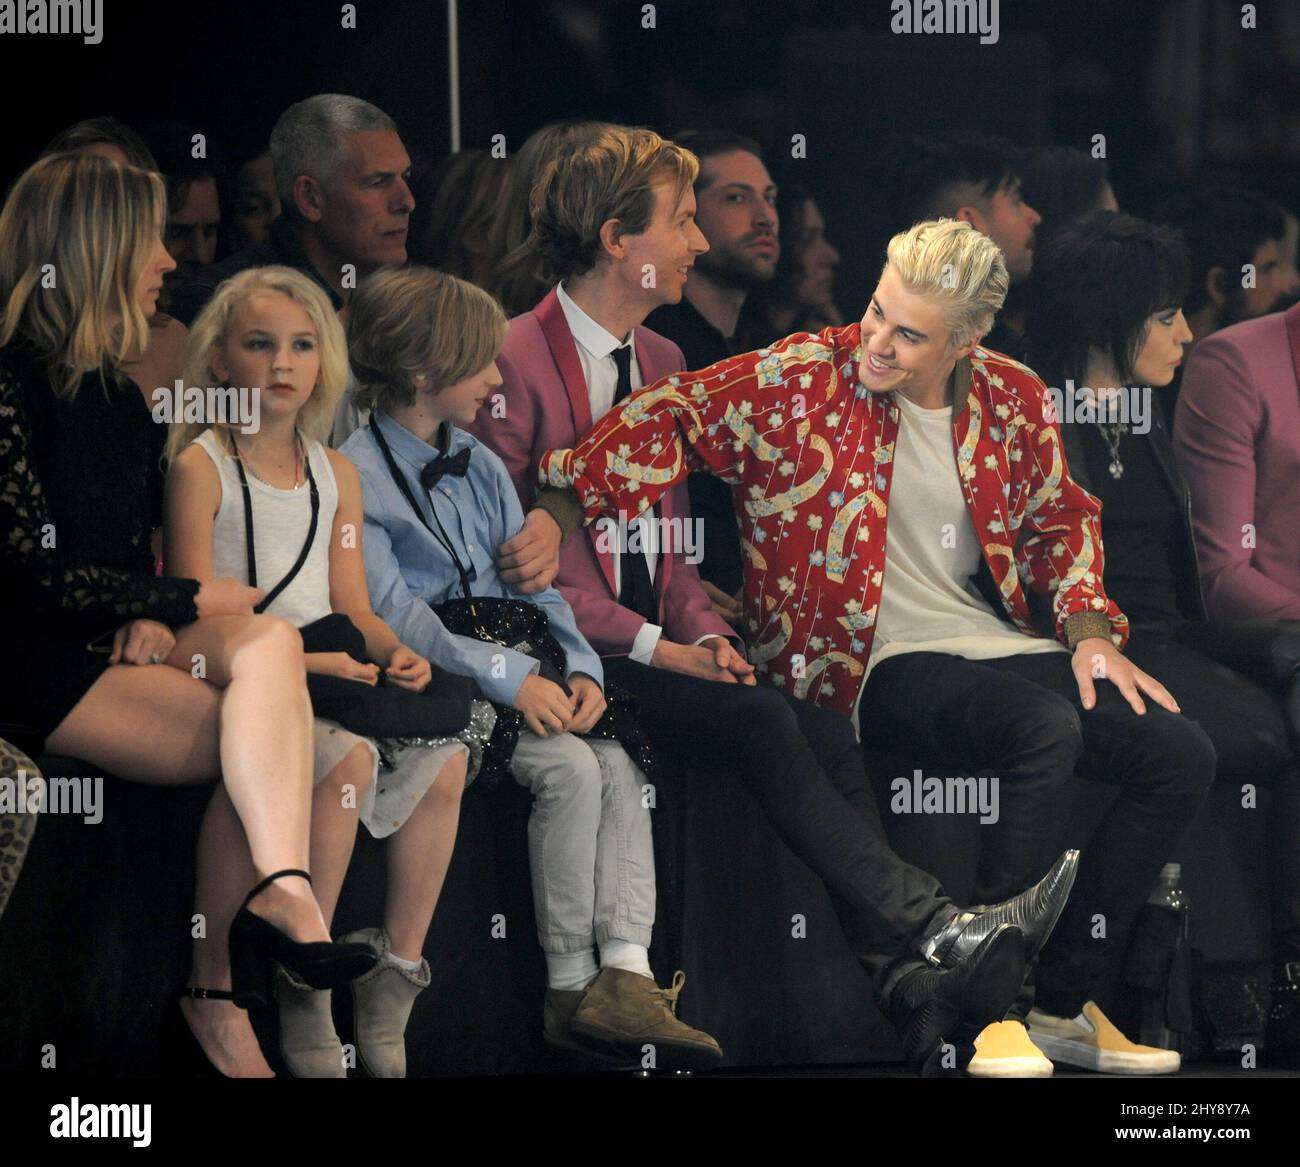 Marissa Ribisi, Tuesday Hansen, Cosimo Henri Hansen, Beck and Justin Bieber attending front row of the Saint Laurent show held at the Hollywood Palladium in Los Angeles, California. Stock Photo